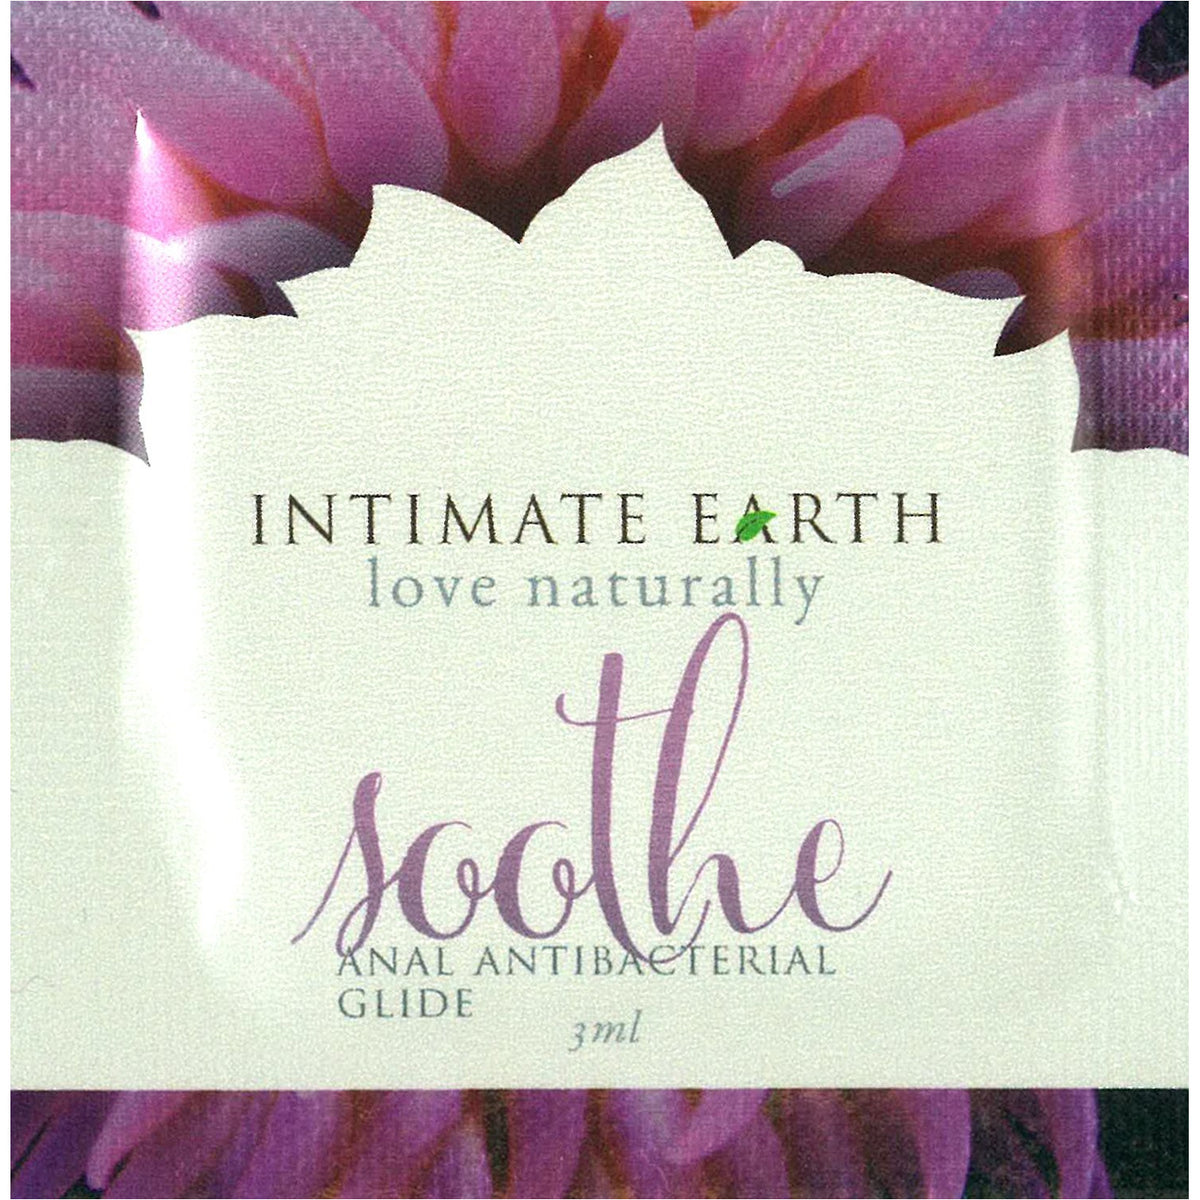 Intimate Earth Soothe - Anal Antibacterial Glide - 3ml/.1oz